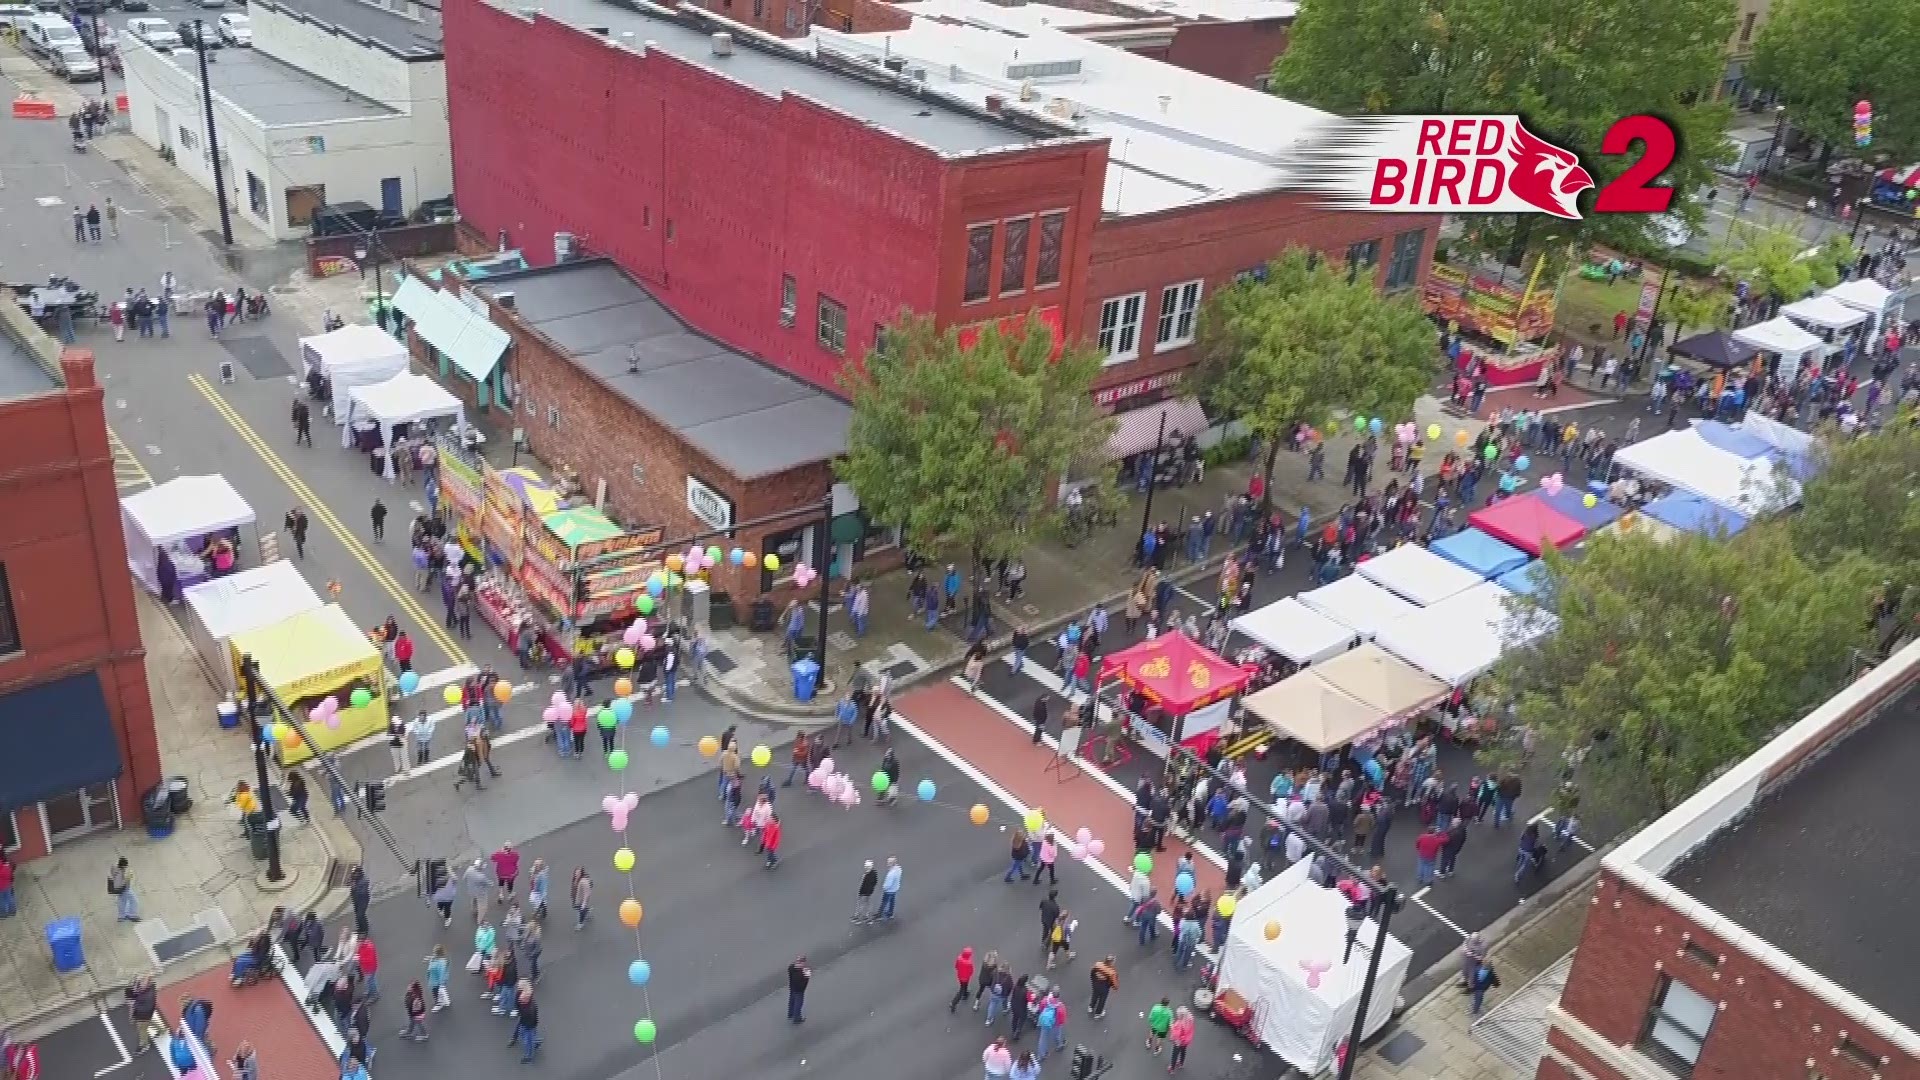 The 35th annual Lexington Barbecue Festival brings out thousands in Lexington on Saturday, October 27.